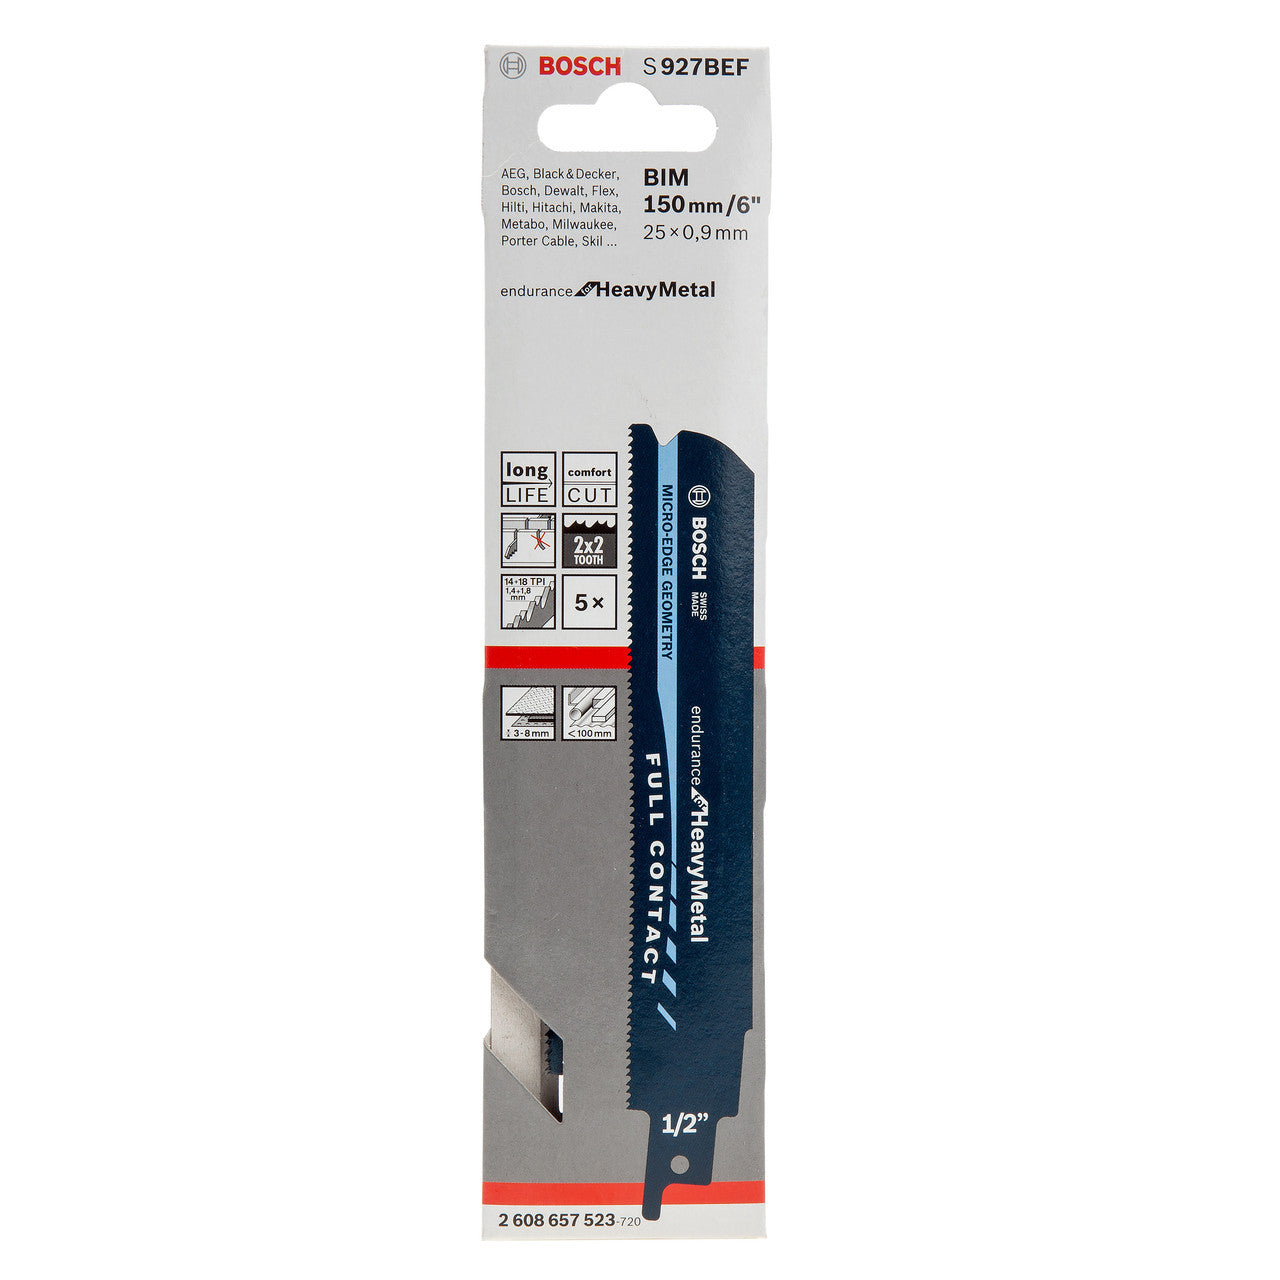 Bosch Sabre Saw Blades S 927 BEF Endurance for Heavy Metal 5 Pack 2608657523 Power Tool Services